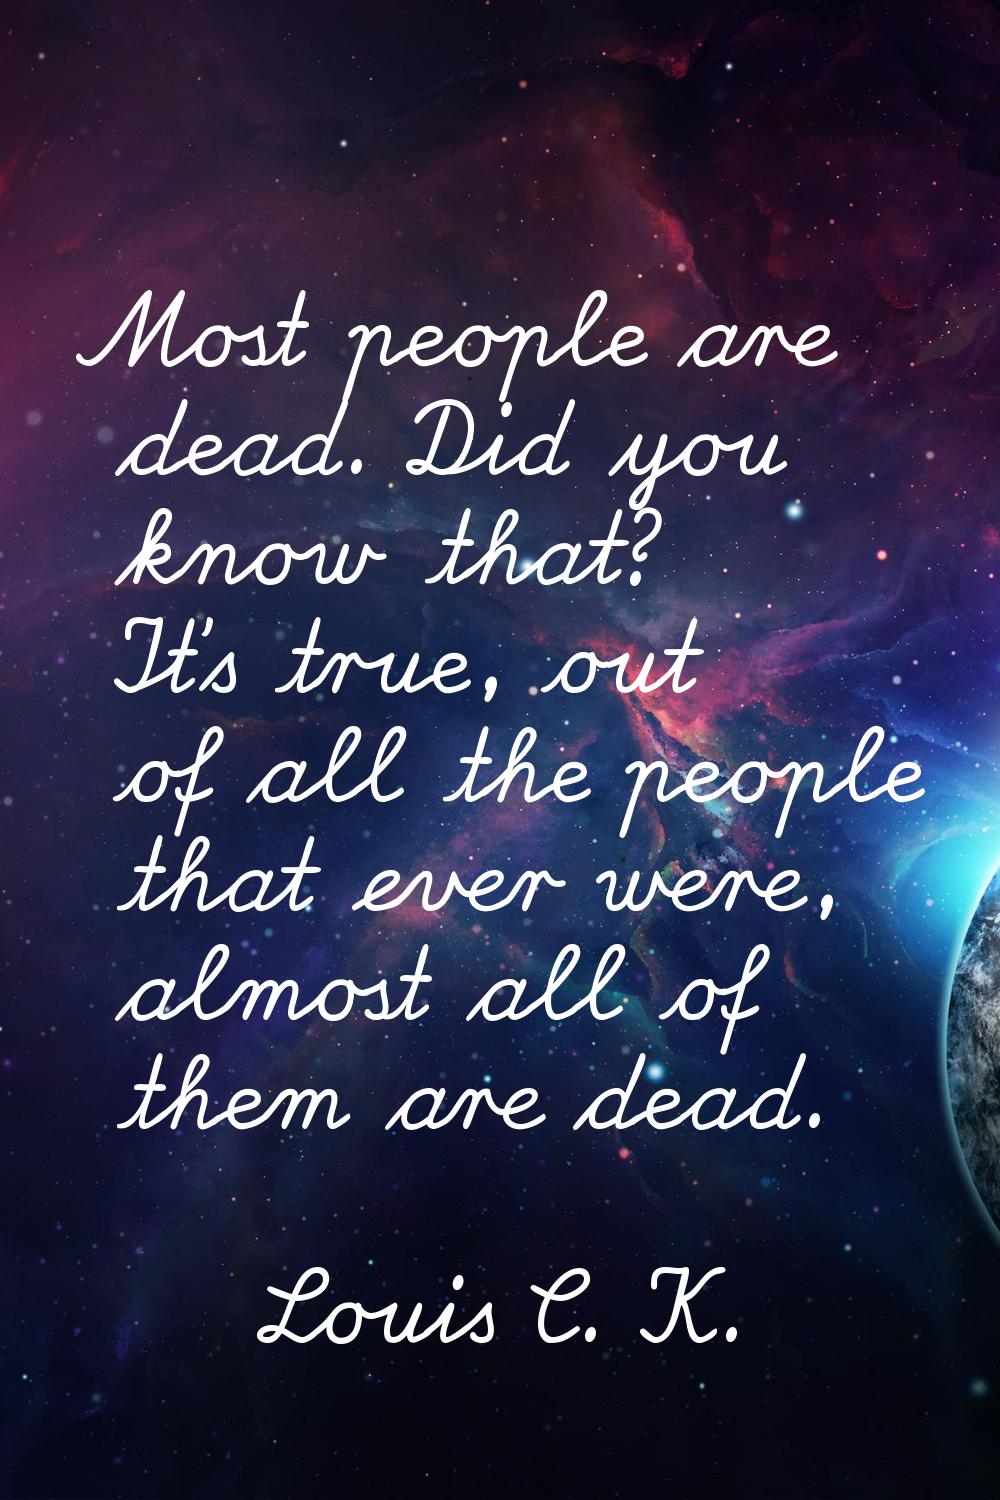 Most people are dead. Did you know that? It's true, out of all the people that ever were, almost al